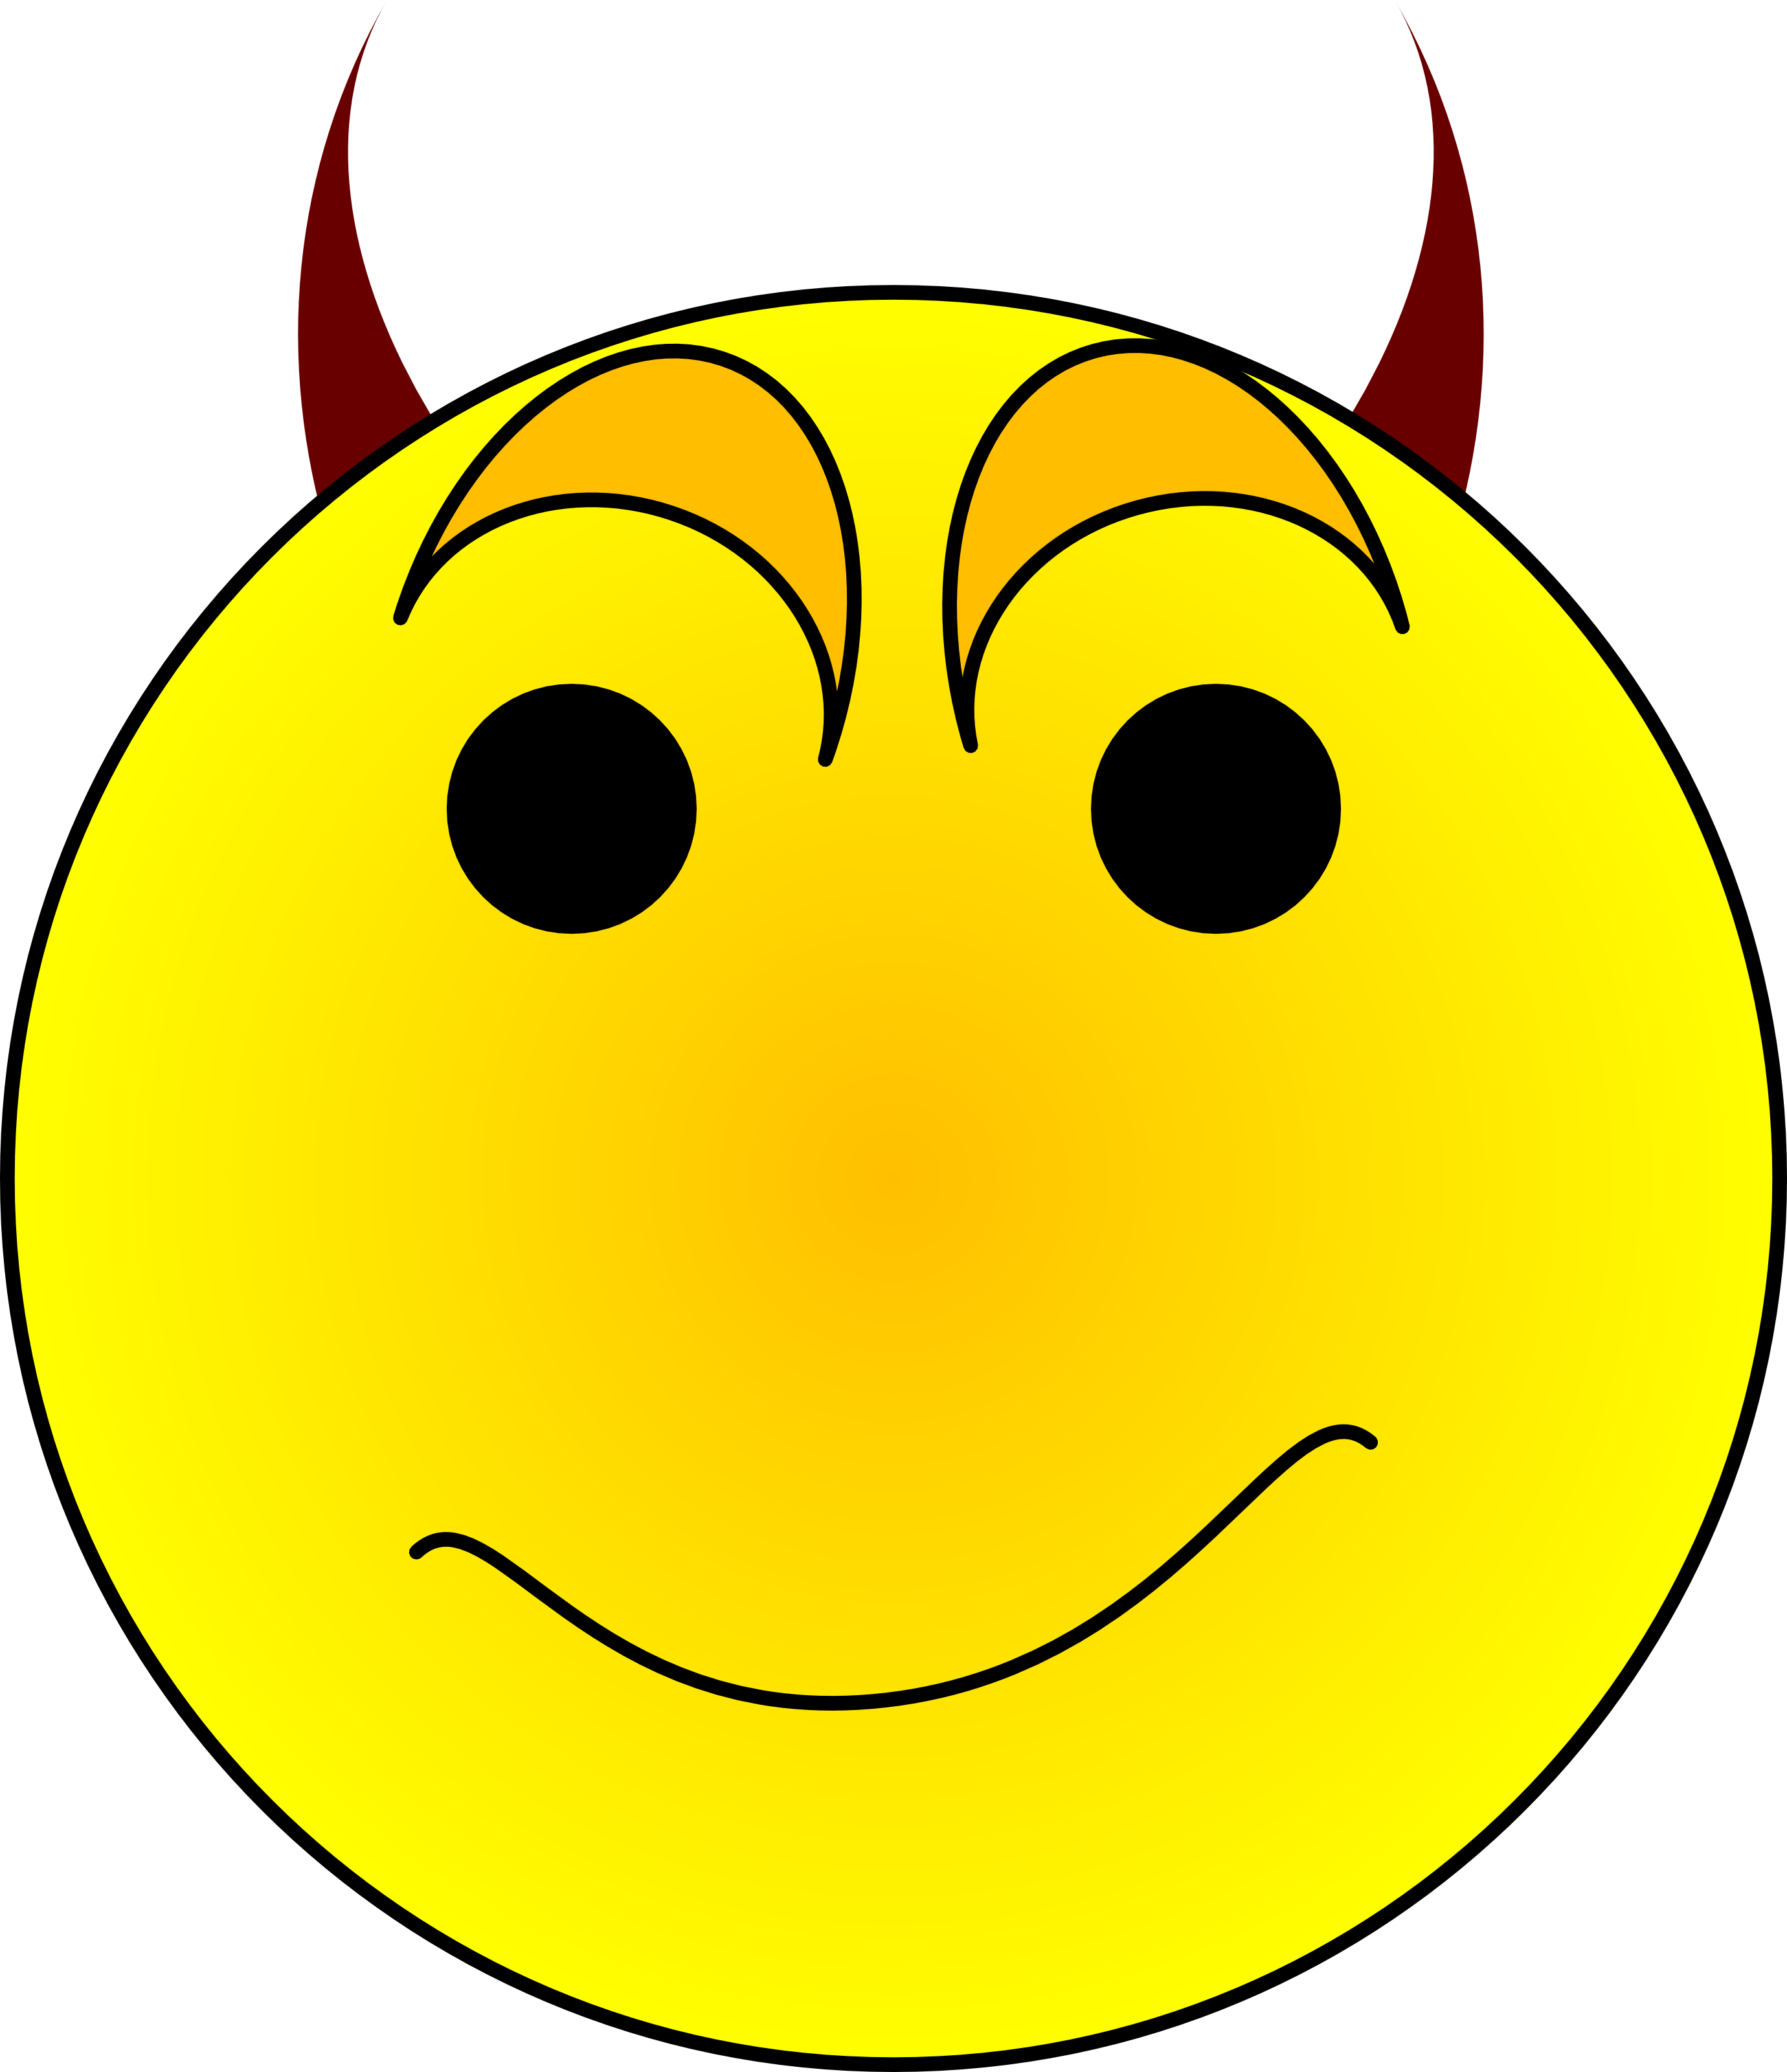 Smiley face graphic free. Wow clipart emoji facebook